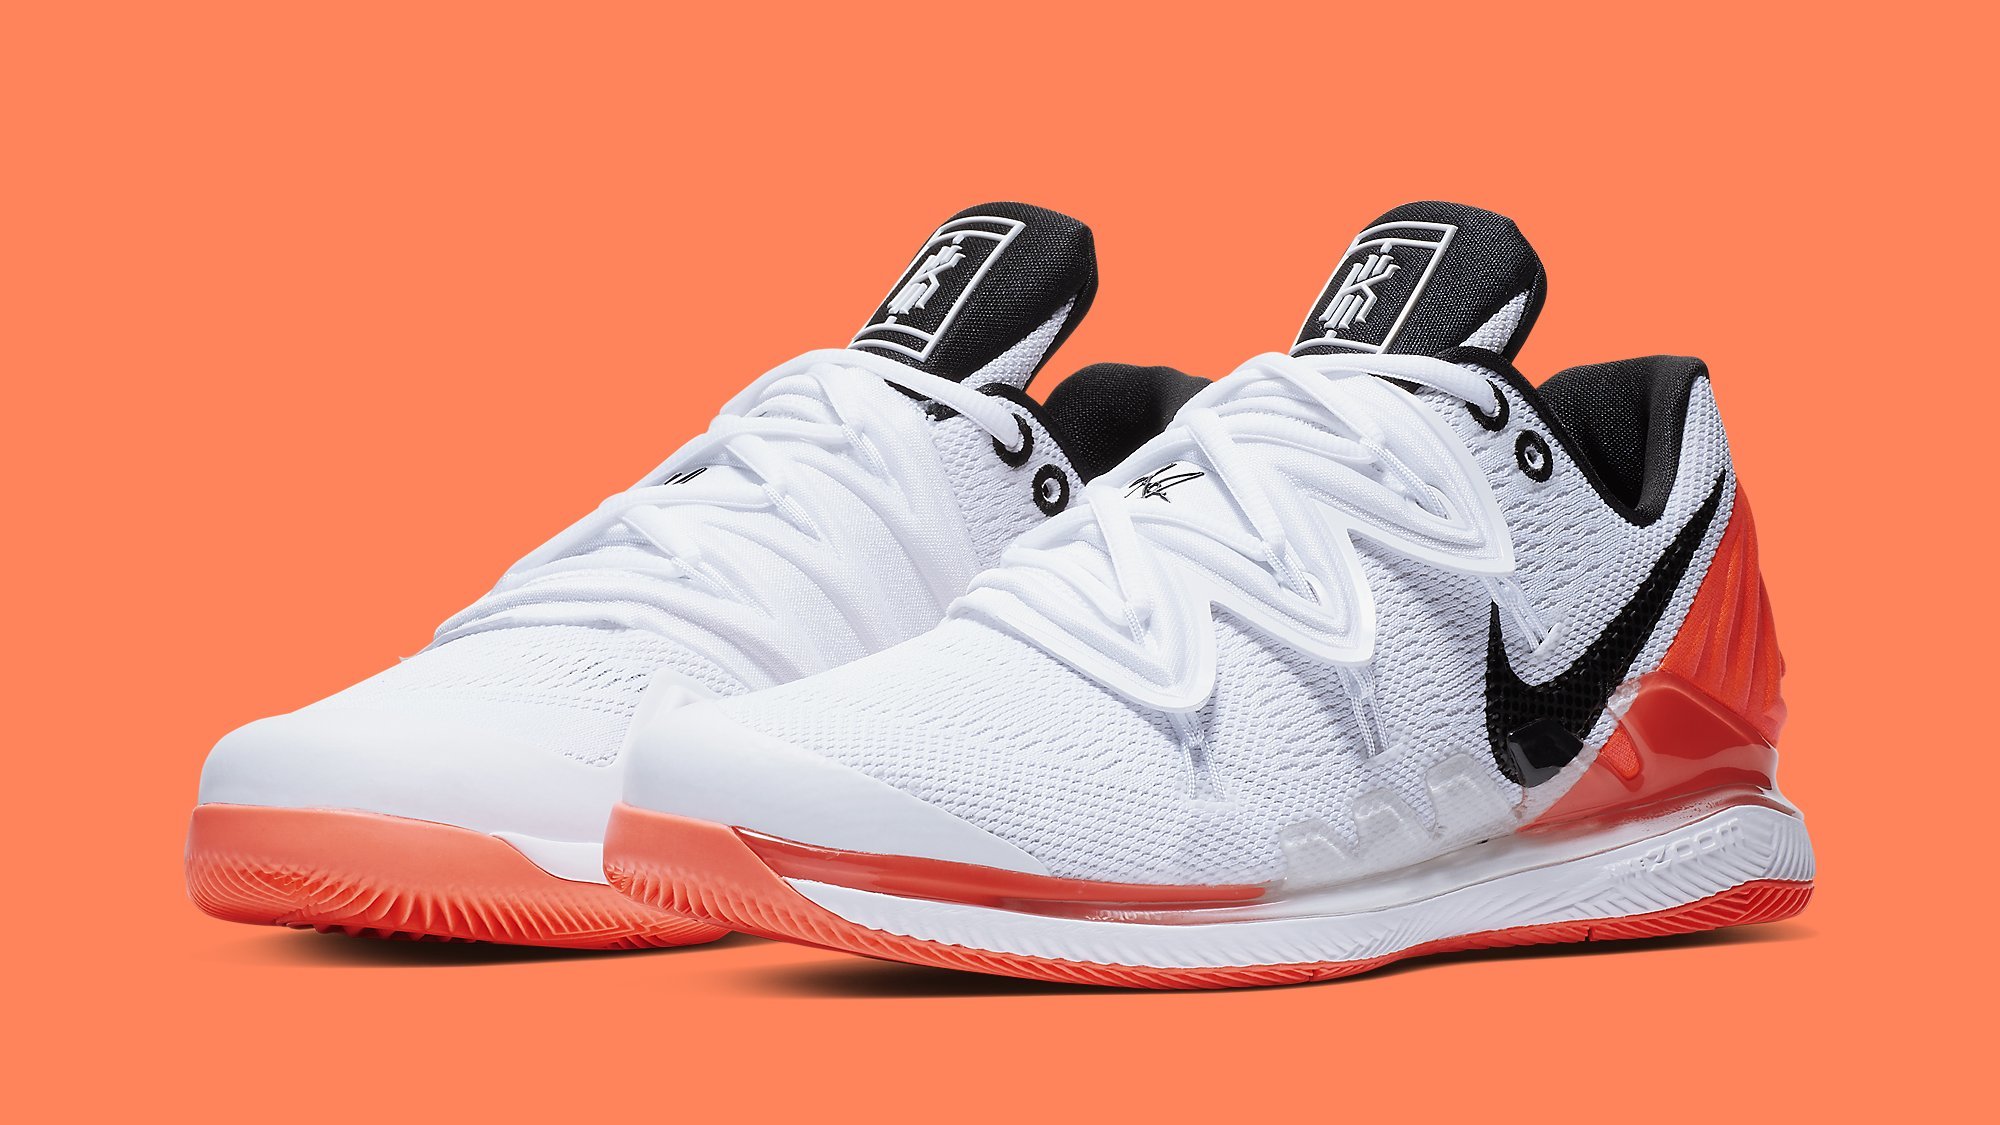 Kyrie Irving x Nick Kyrgios NikeCourt Vapor X 'Kyrie 5' BQ5952-100 Release  Date | Sole Collector